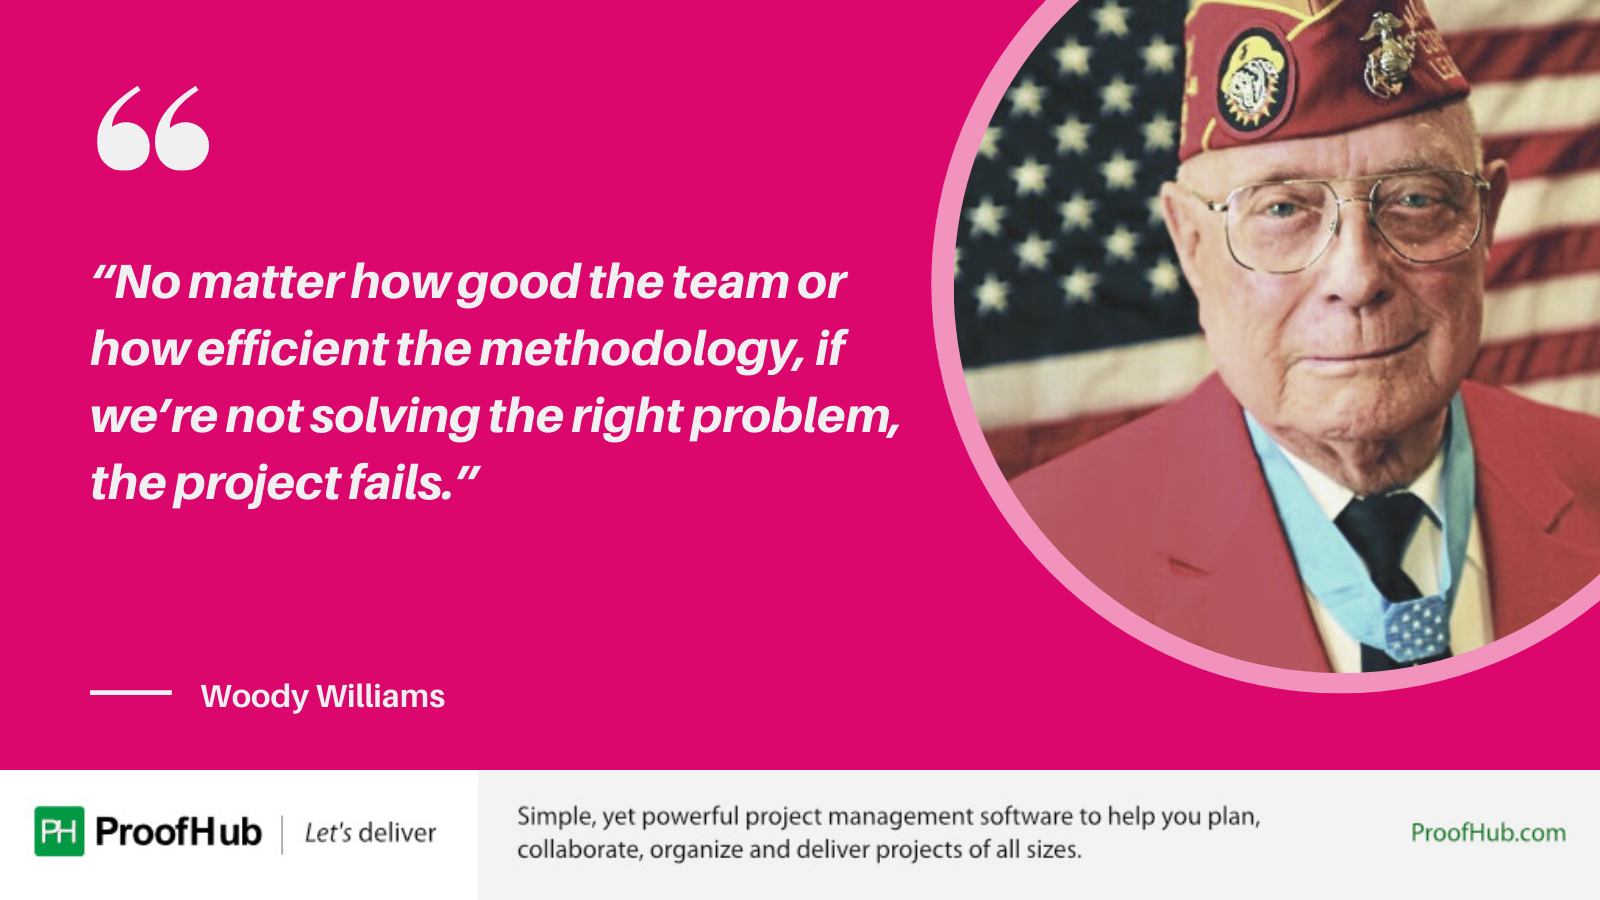 No matter how good the team or how efficient the methodology, if we’re not solving the right problem, the project fails quote byWoody Williams